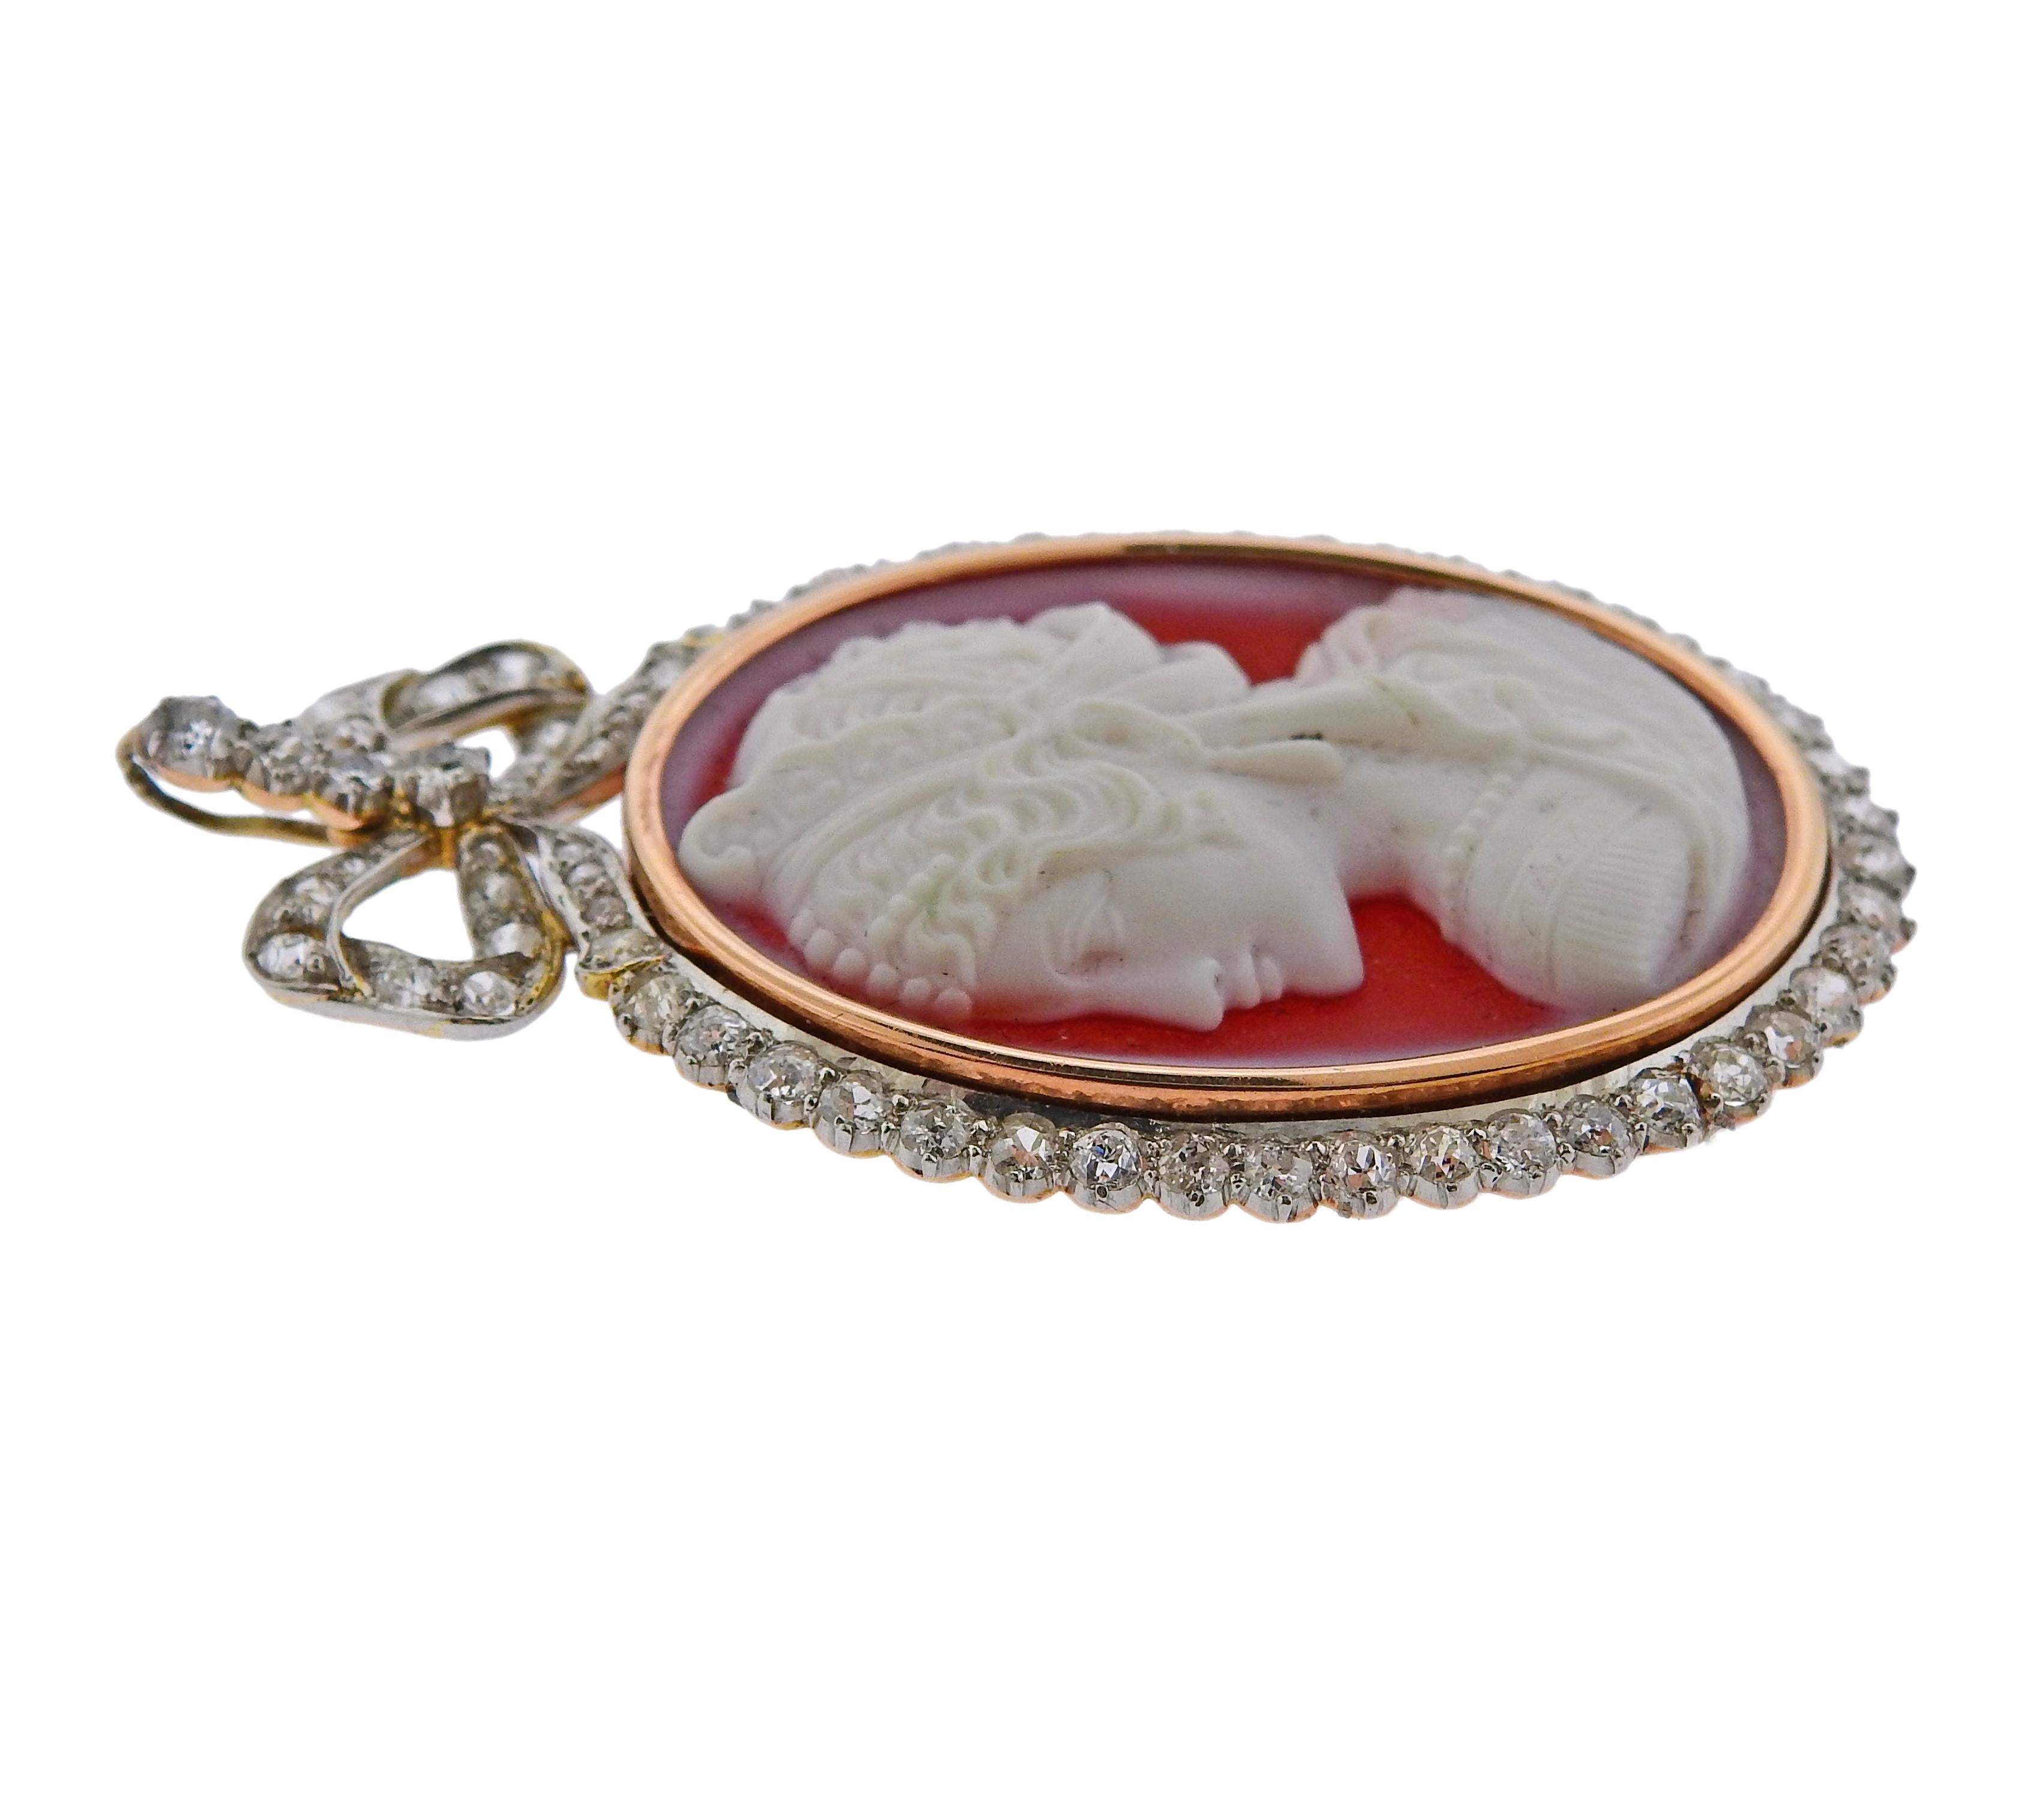 Antique 14k gold cameo brooch pendant, set with carnelian and approx. 1.40ctw in diamonds. Measures 57mm x 35mm. Back of the carnelian is signed with a name (illegible to read).  Weighs 17 grams.

SKU#PD-00163